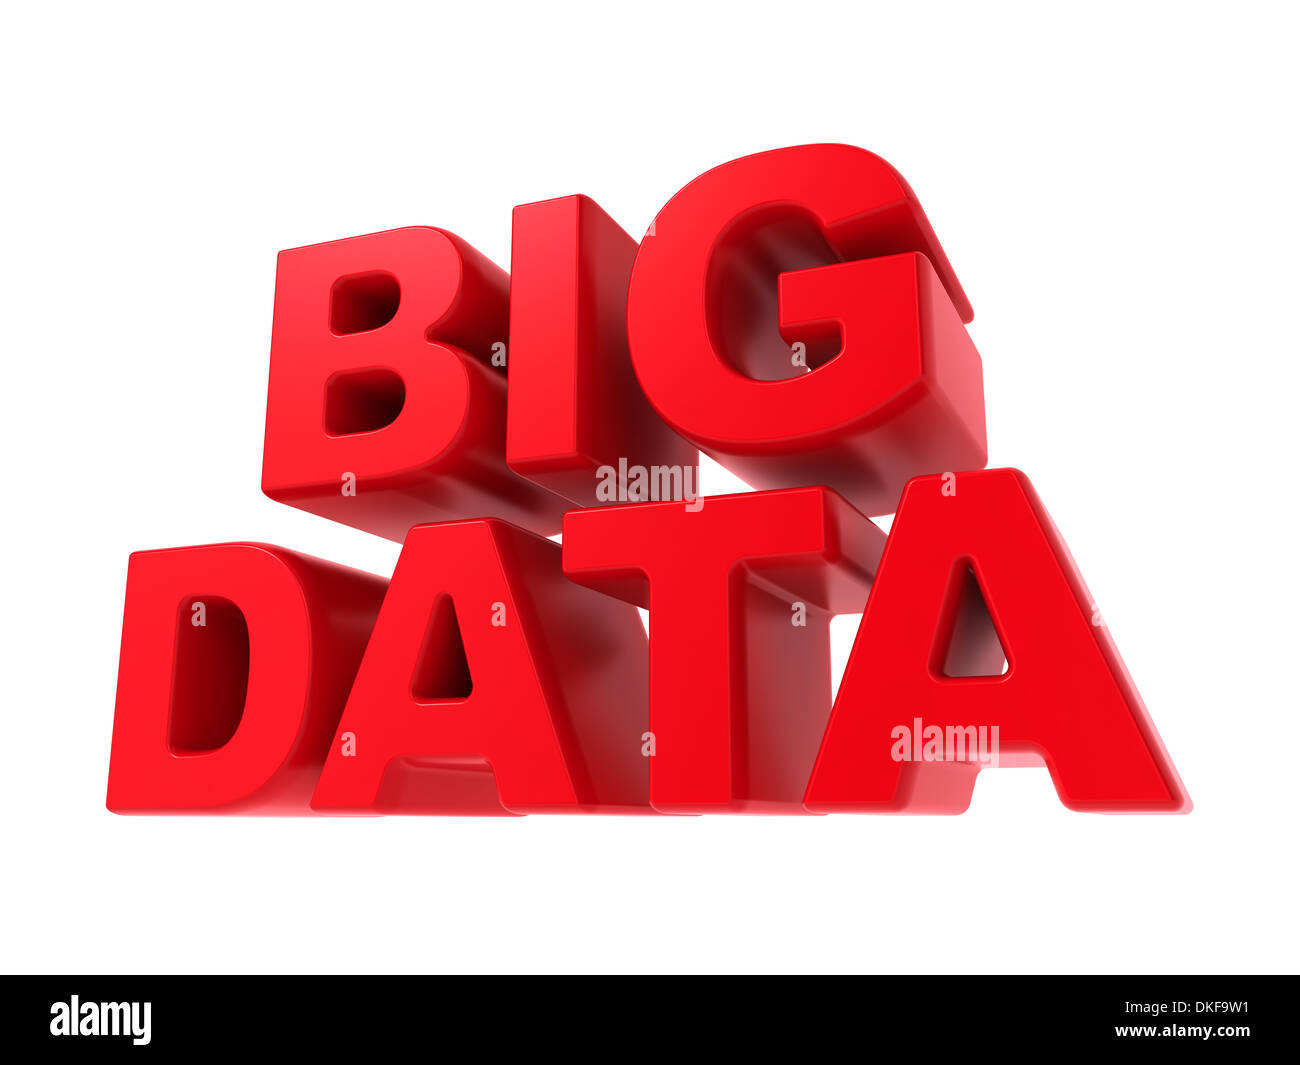 Big Data - Red Text Isolated on White. Stock Photo